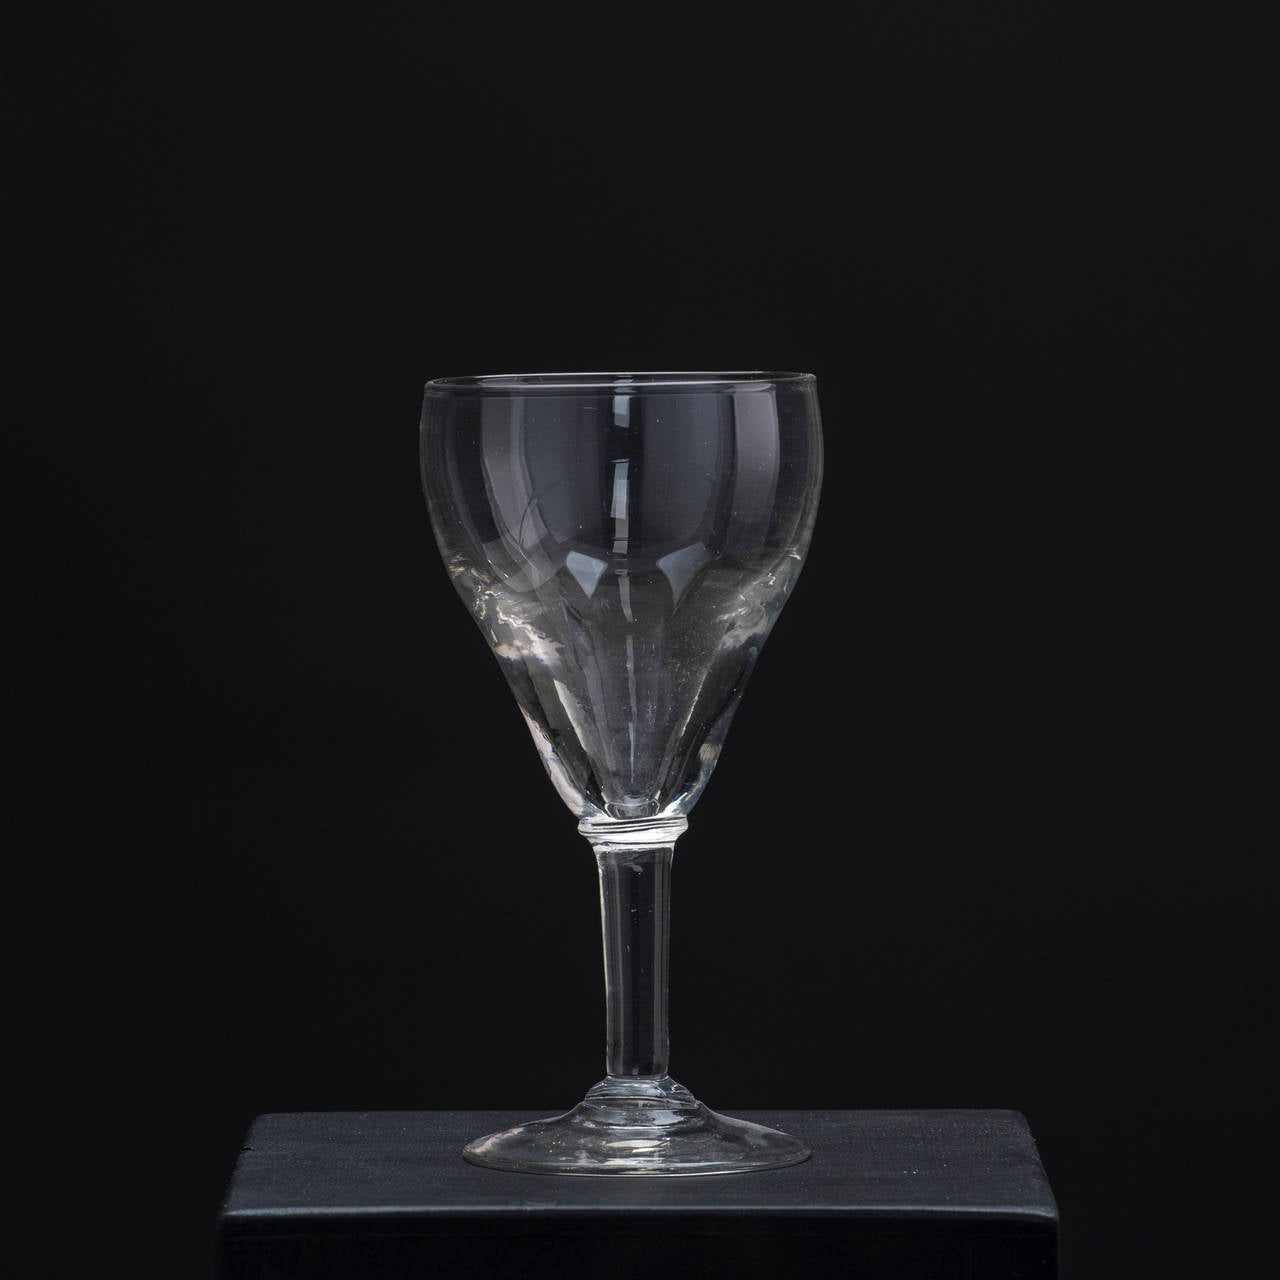 French bistro glasses about 1900.
60 USD per piece.
(We have 13 pieces)